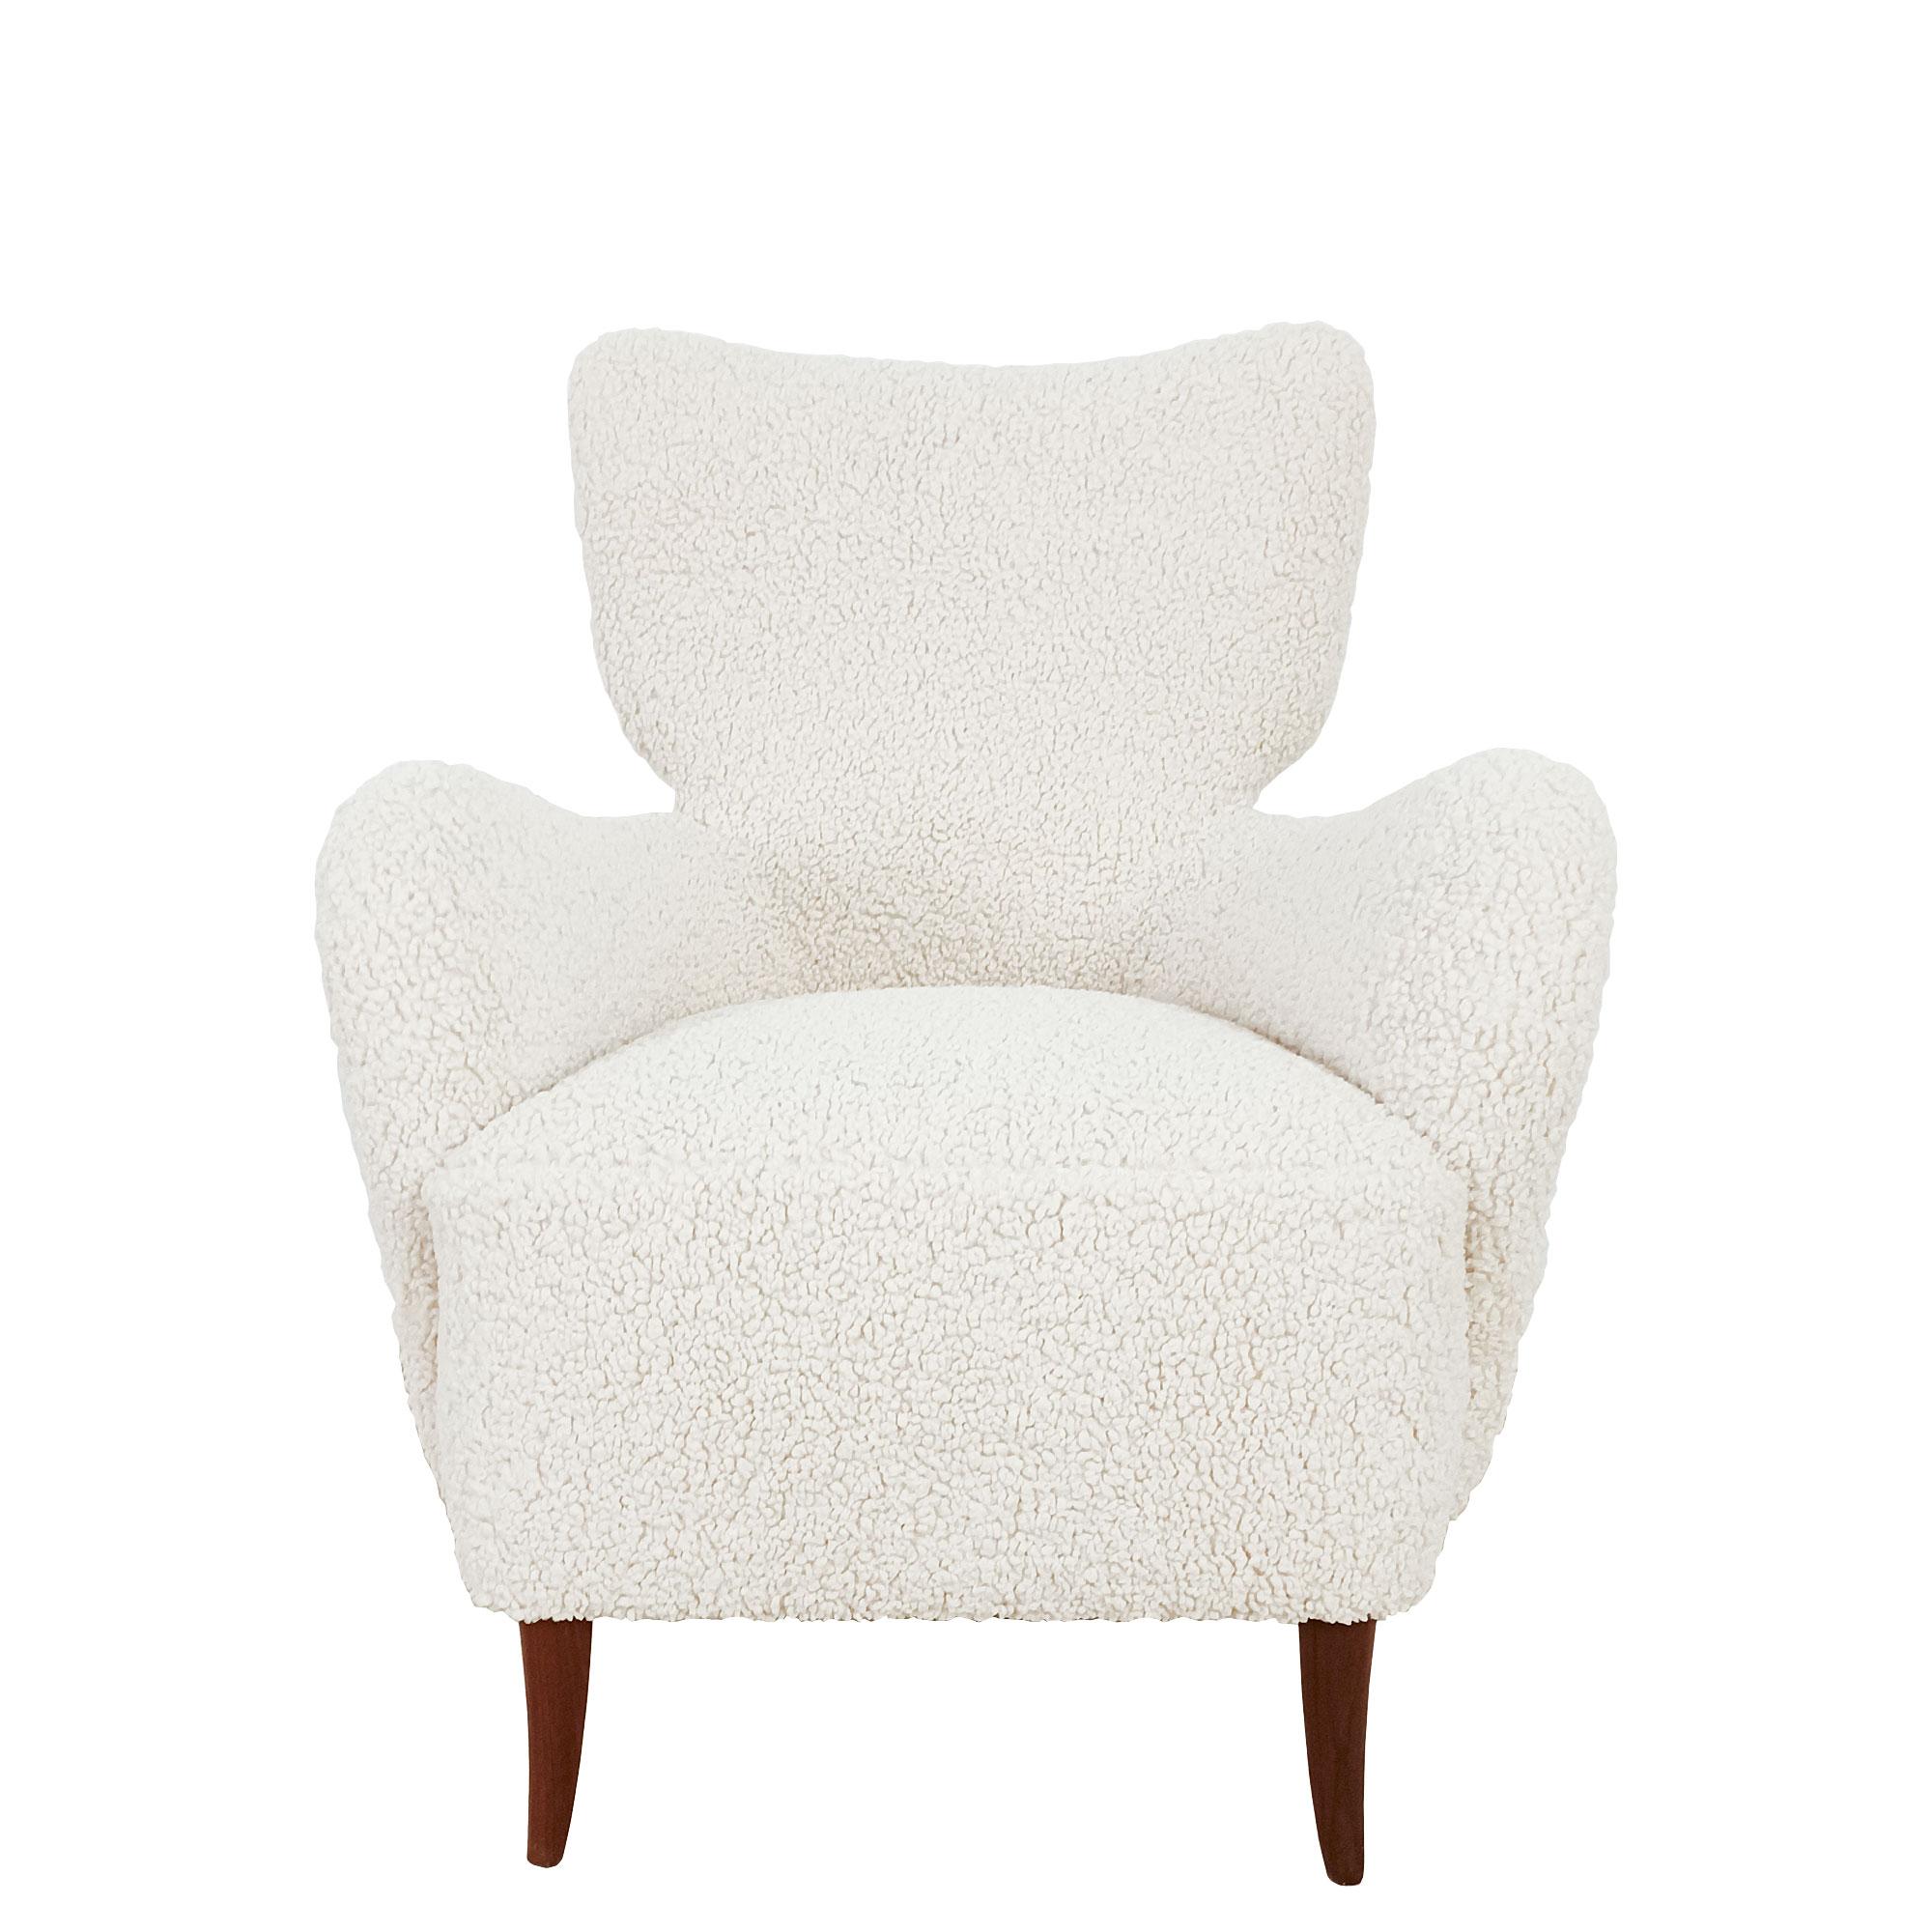 Pair of small low armchairs, solid mahogany legs, fillings and upholstery completely new, off-white bouclette fabric.

Italy c. 1940.